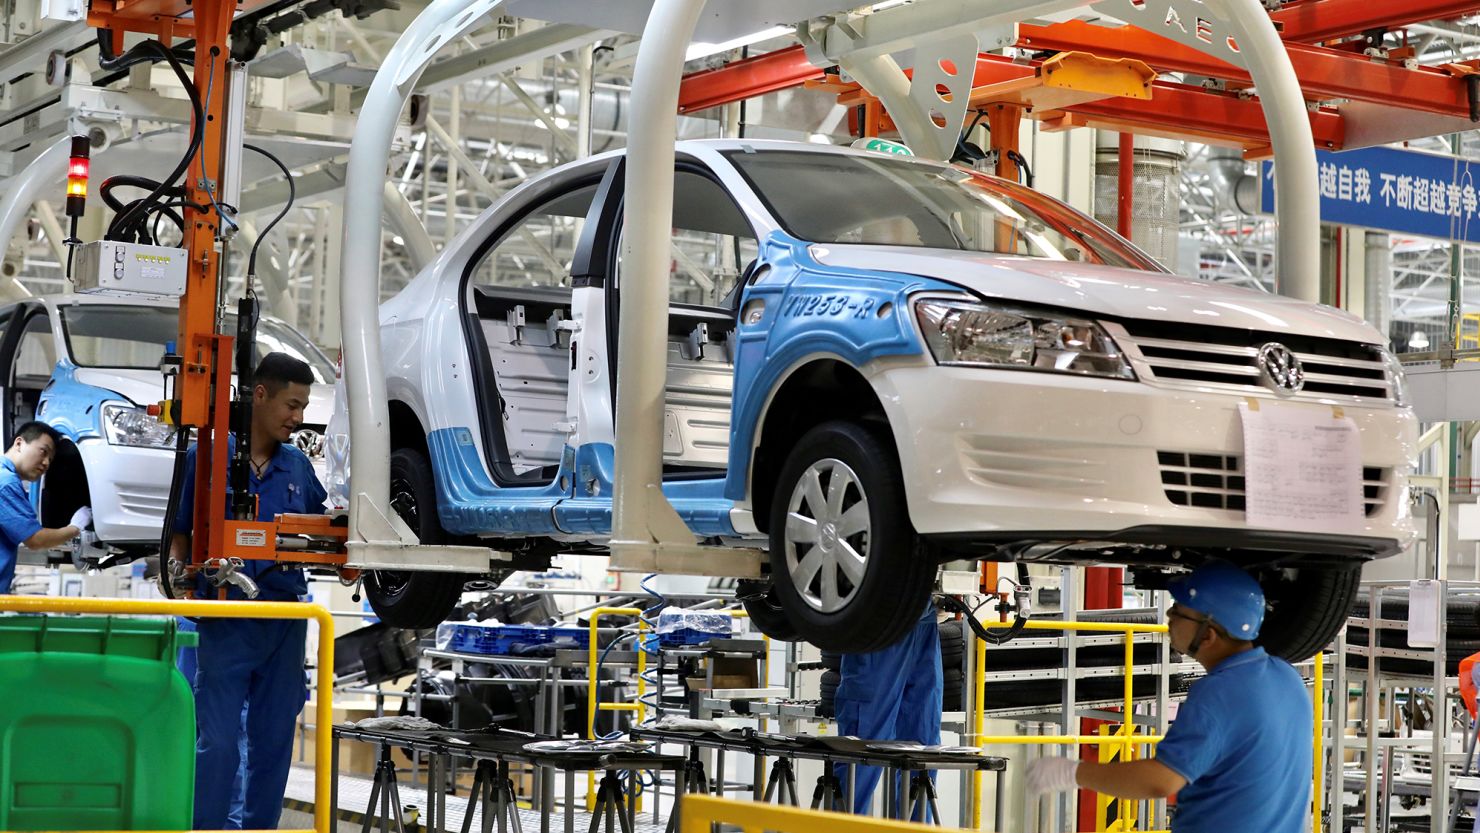 Volkswagen operates its plant in Urumqi, Xinjiang as a joint venture with China's SAIC Motor. 